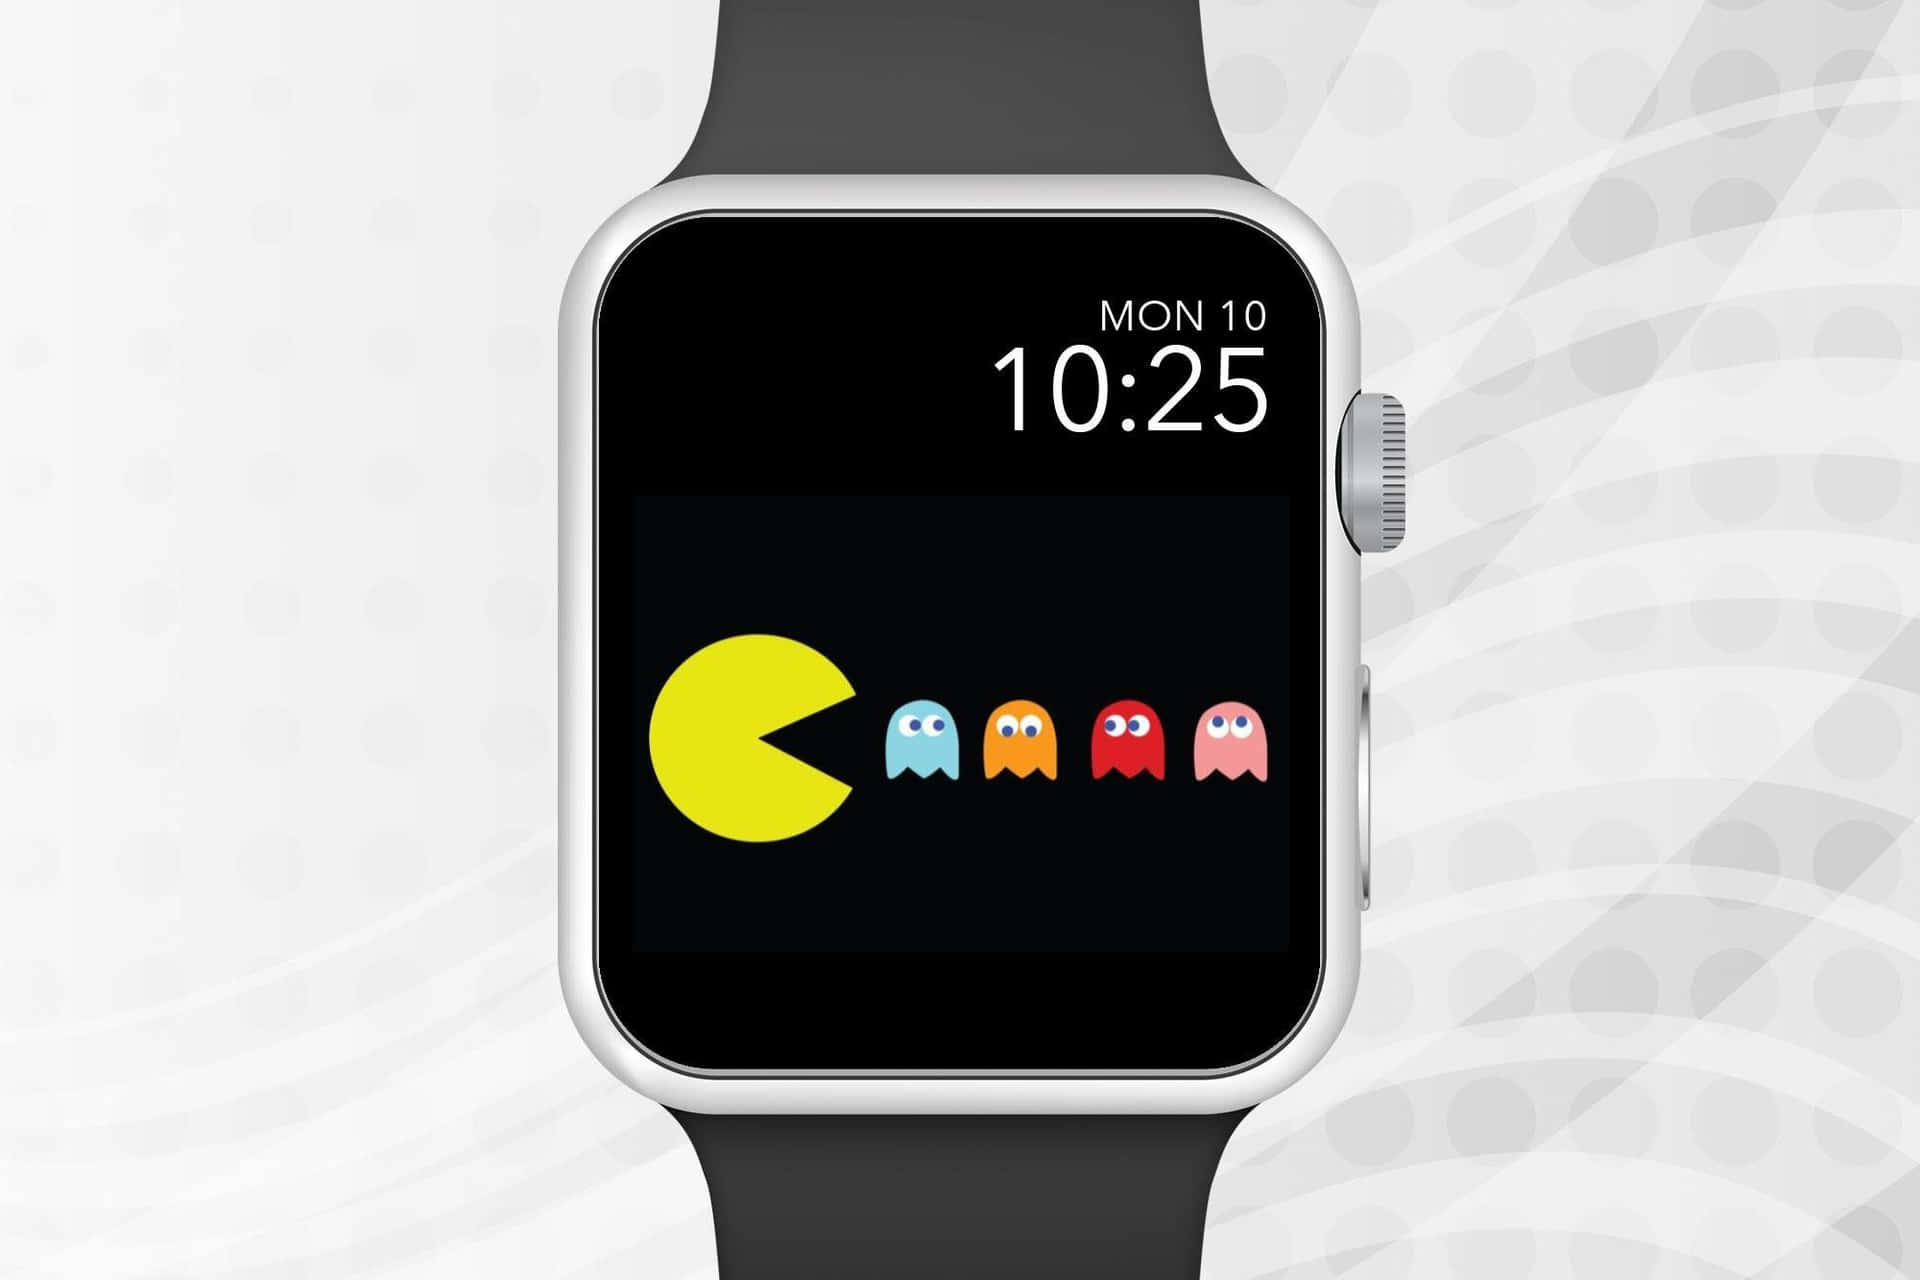 Enjoy the convenience of having the Apple Watch on your wrist!